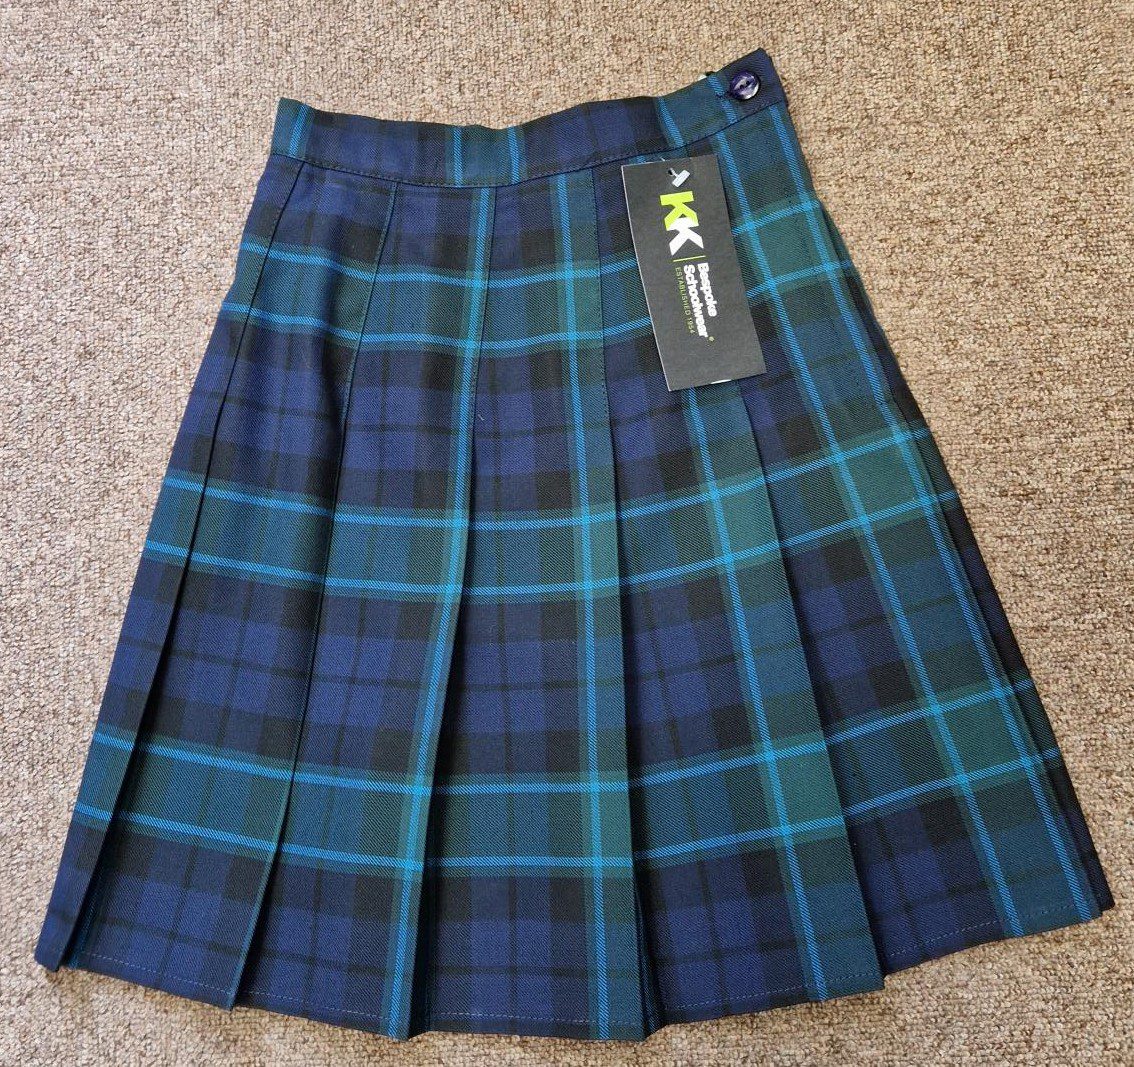 RGS Dodderhill Tartan Skirt - Years 4 to 11 !!!!! SALE 1/3 OFF WHILE ...